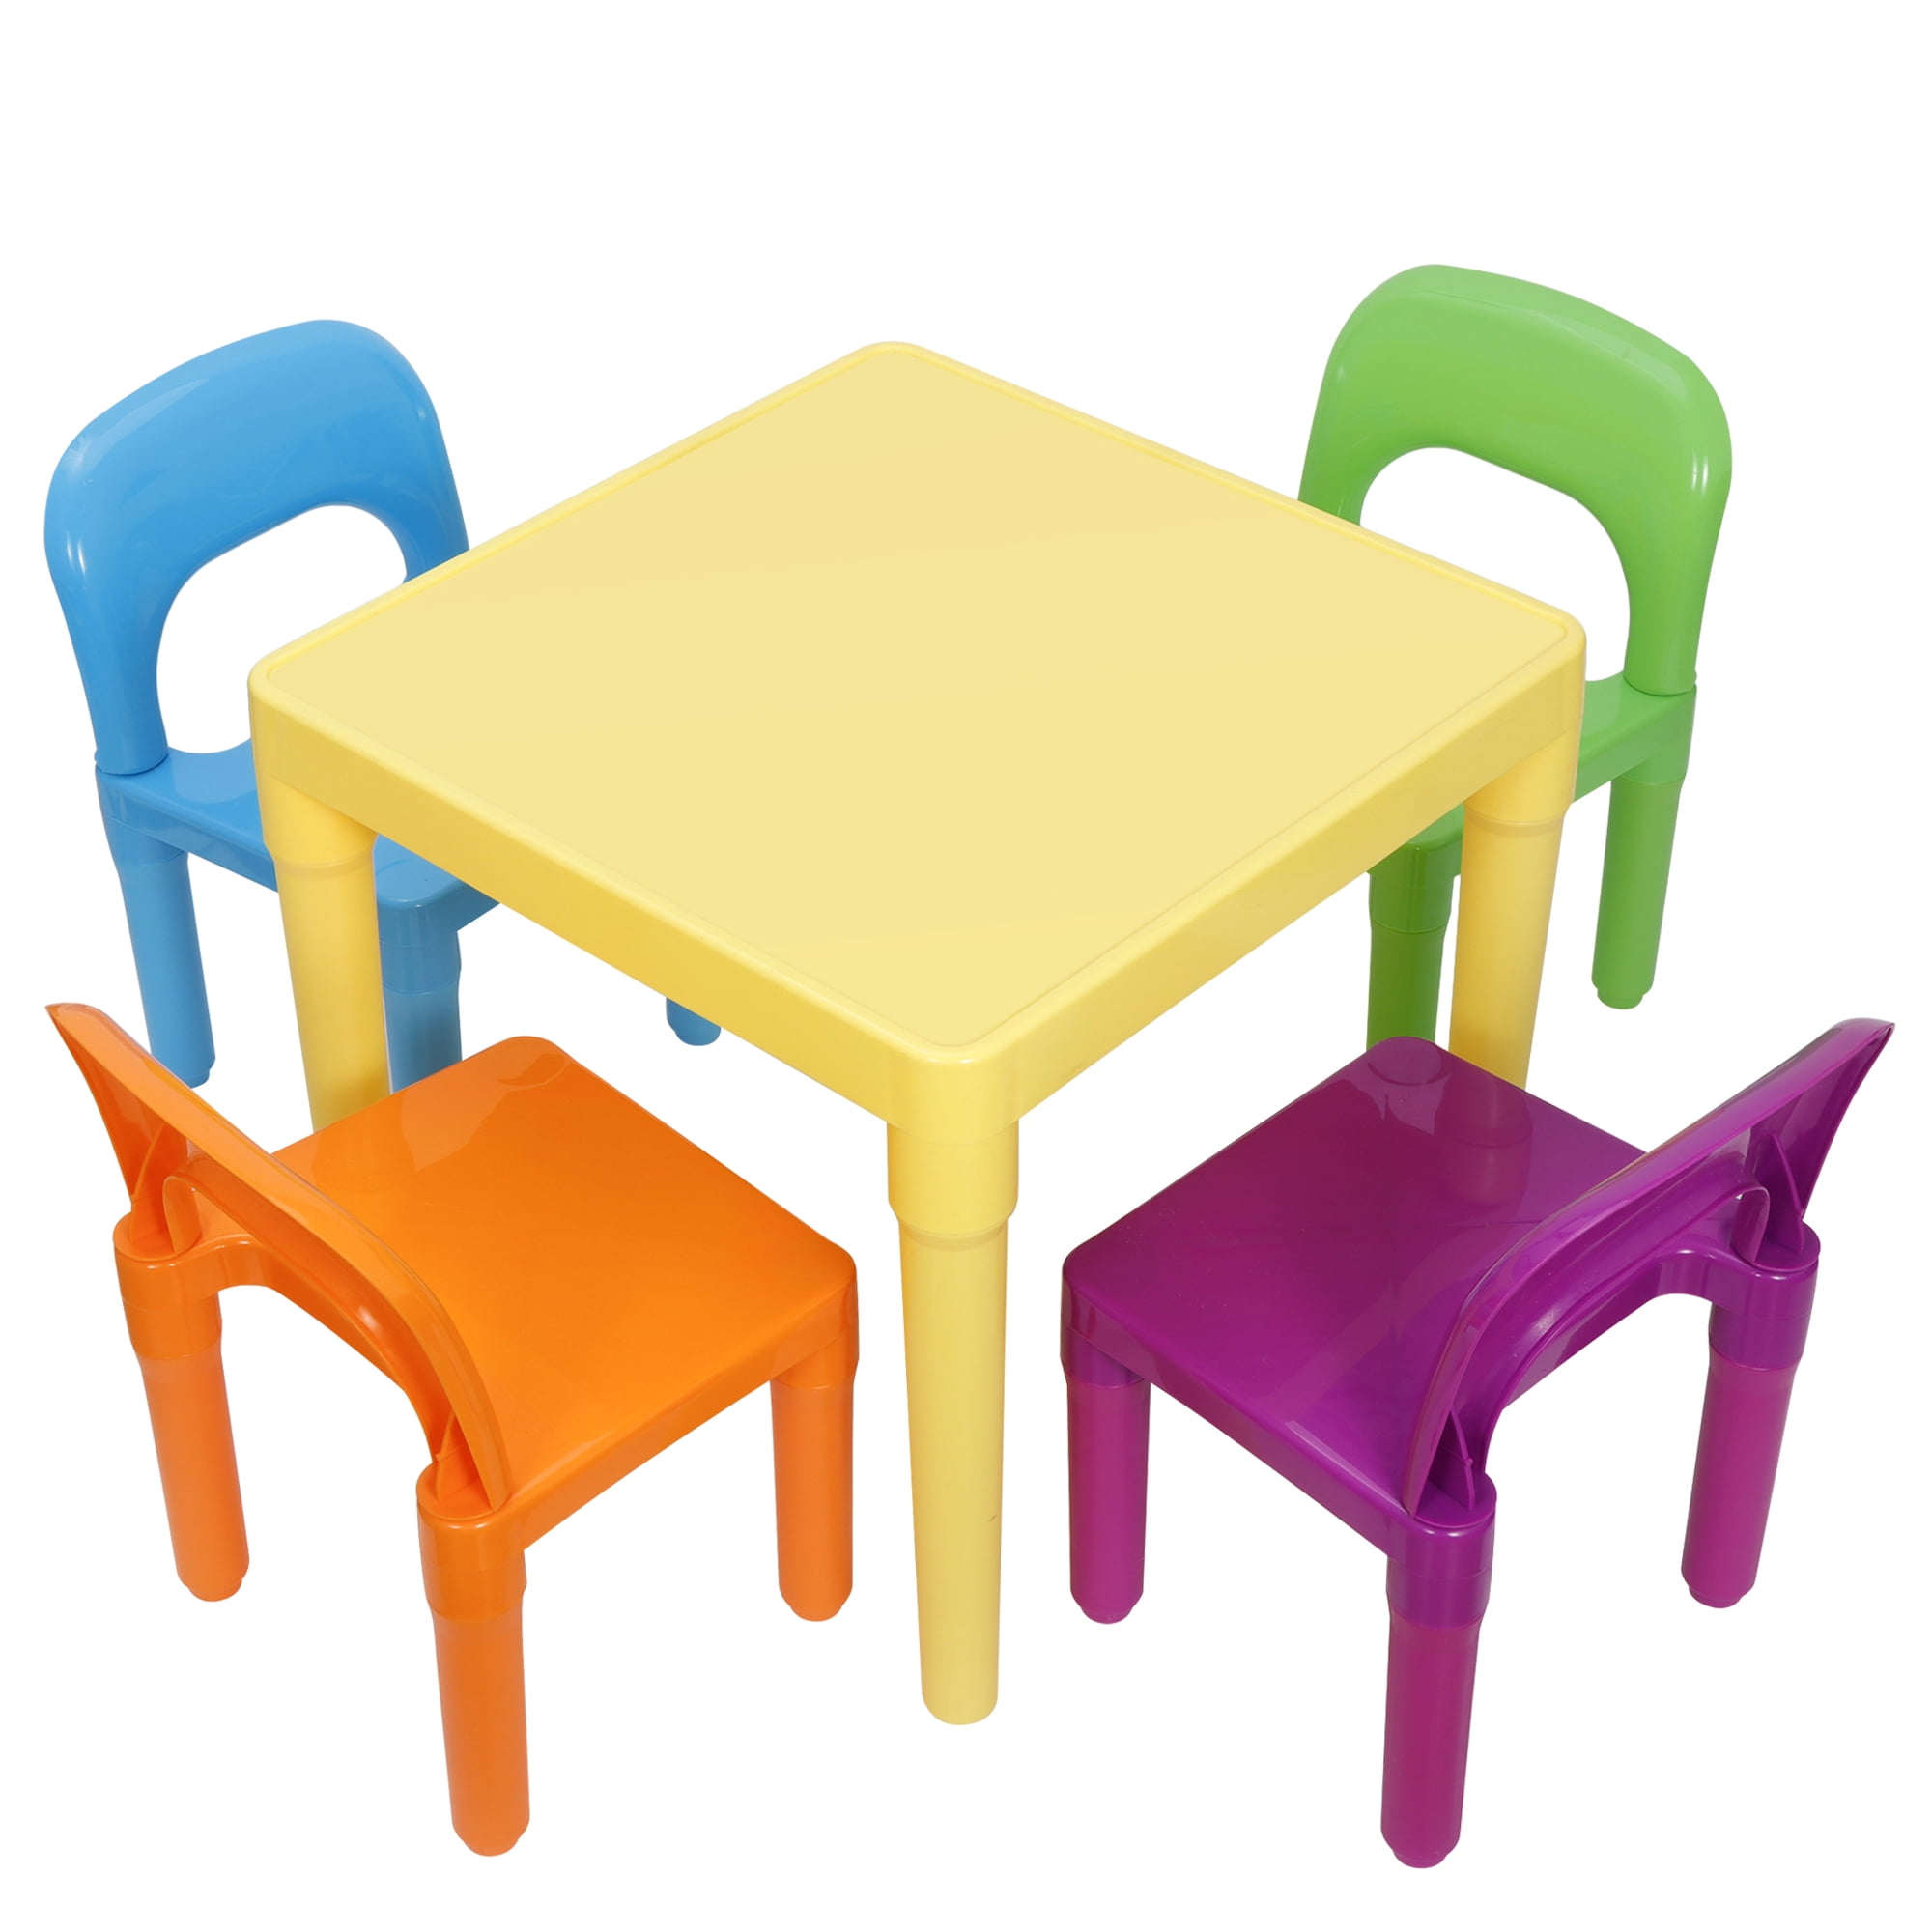 Details about   Kids Table & Chair Desk Set Drawing Board Childrens Activity Play & Build Bricks 